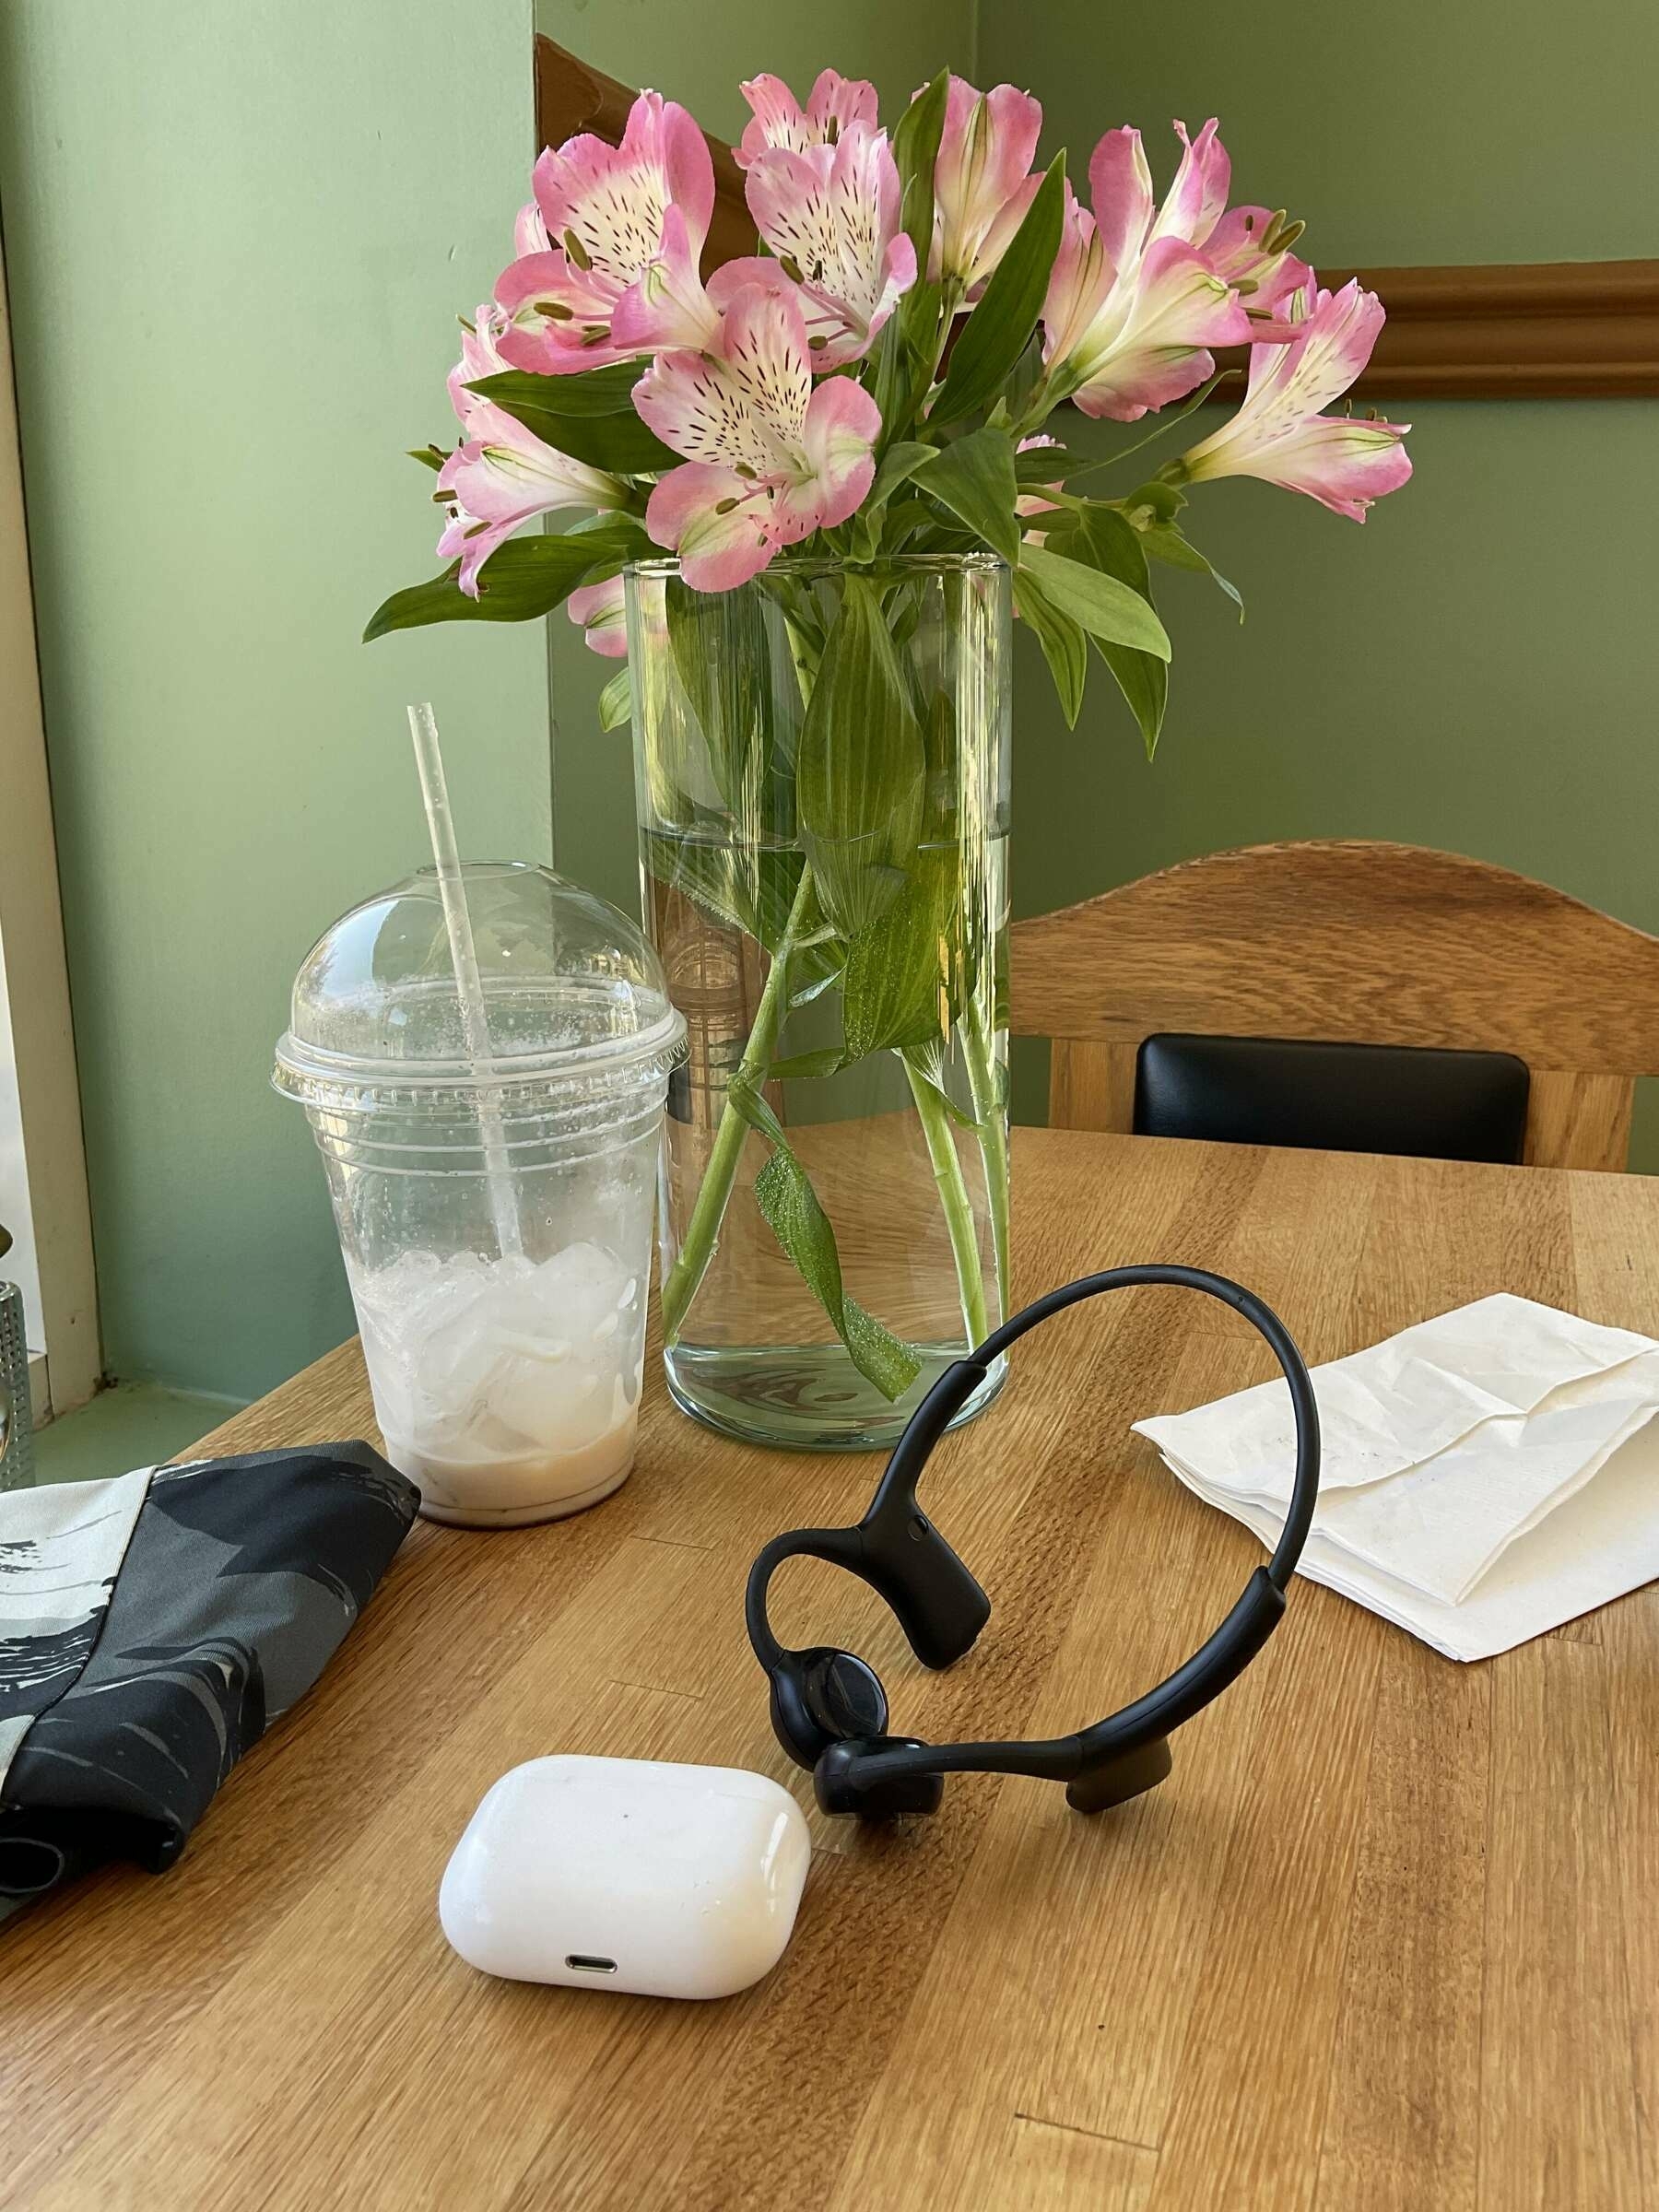 Sentien Audio and Apple AirPods Pro on table in front of vase with flowers sitting in water